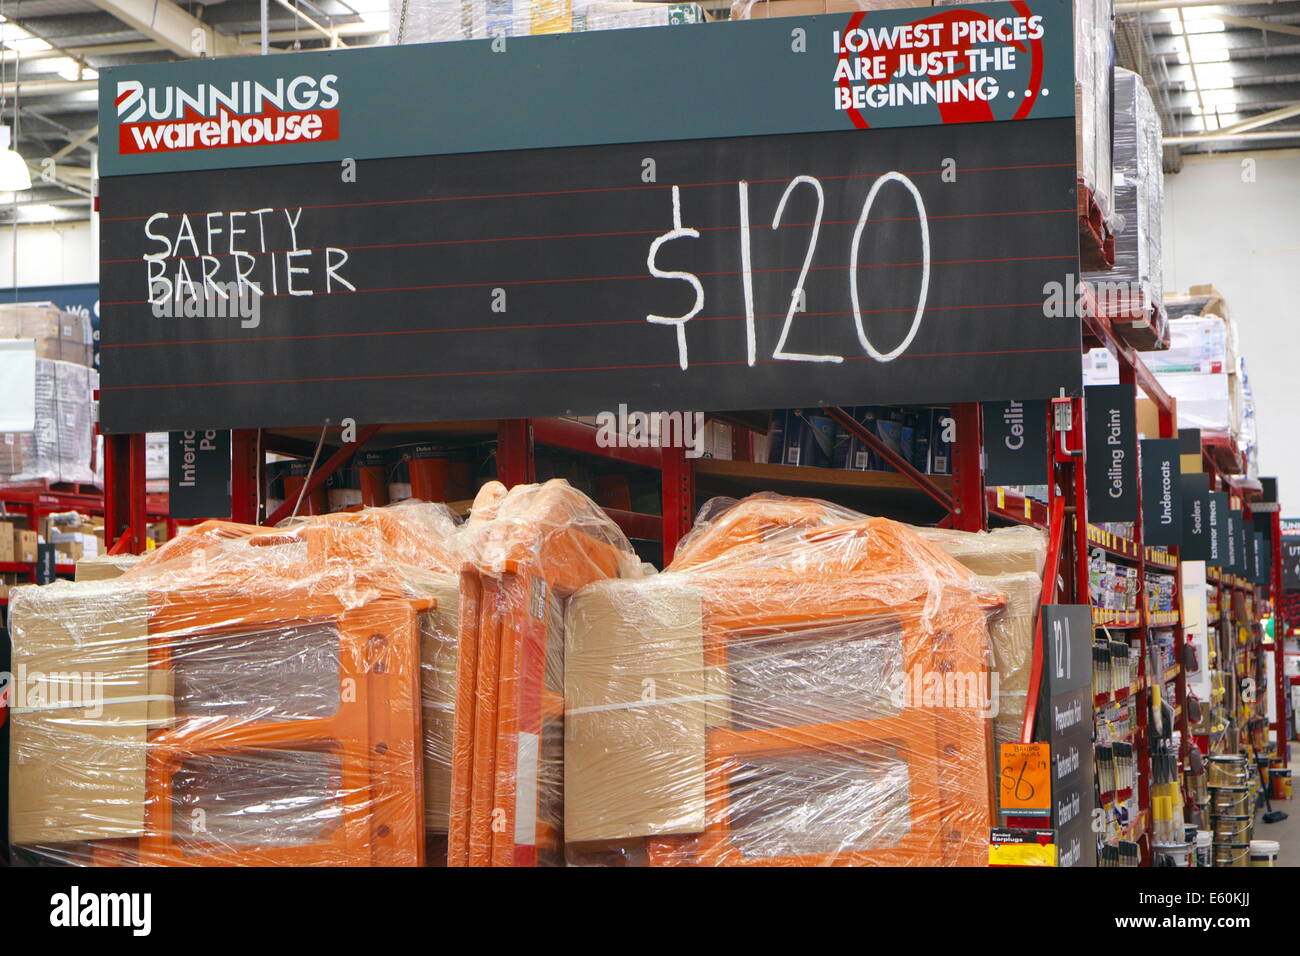 Bunnings is a national DIY retailer owned by wesfarmers, it sells tools, timber, equipment for builders and home owners, sydney Stock Photo